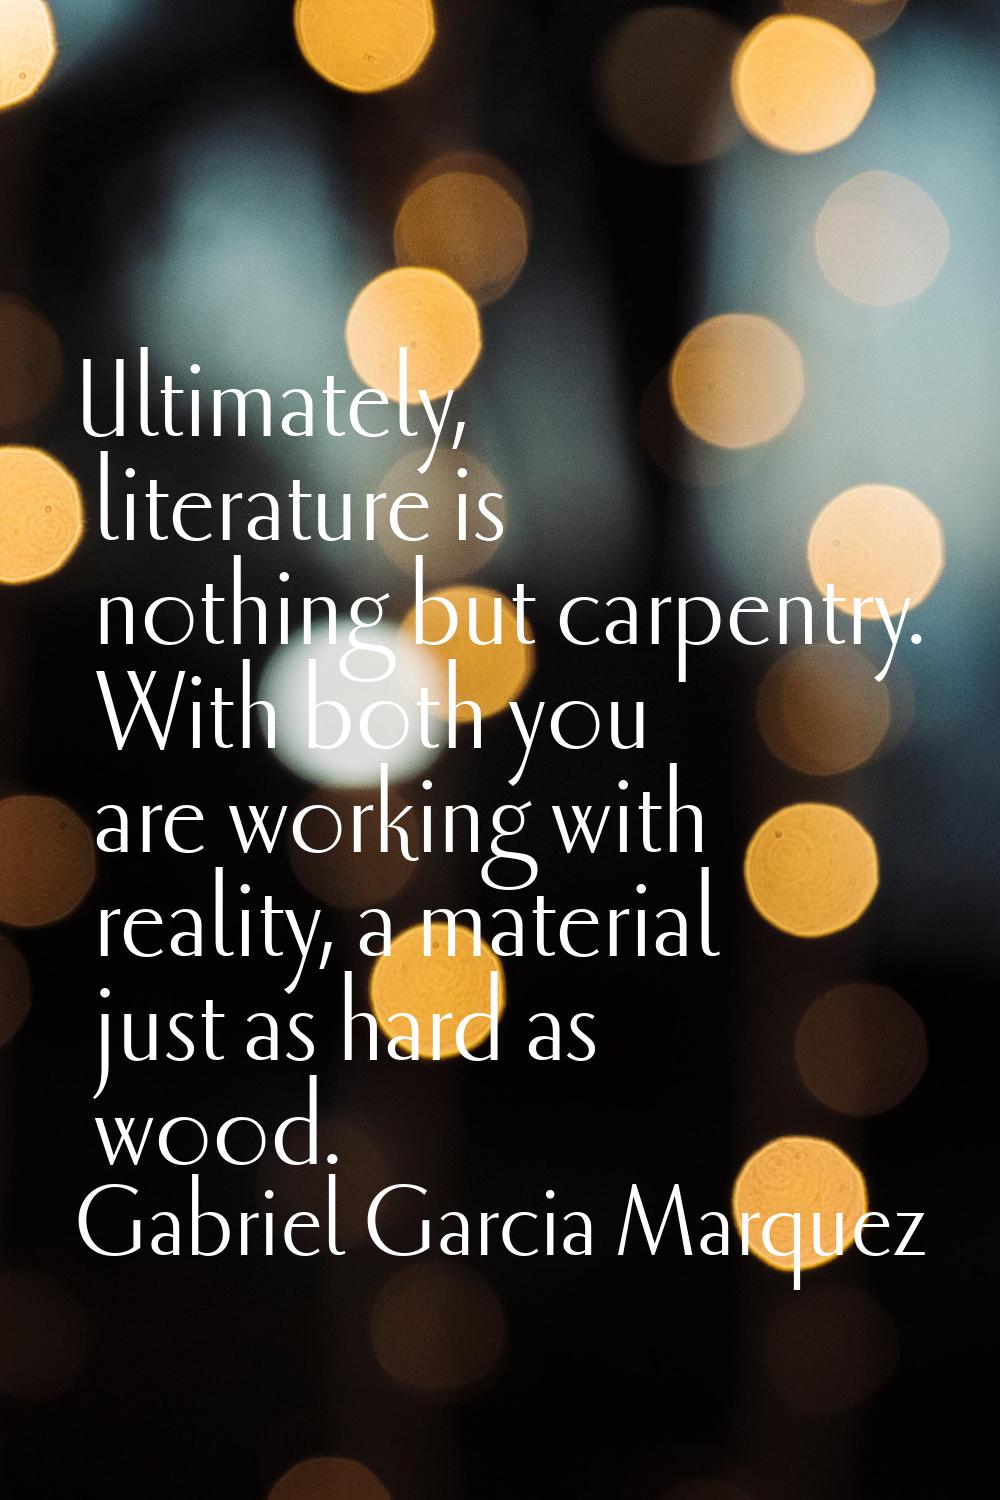 Ultimately, literature is nothing but carpentry. With both you are working with reality, a material